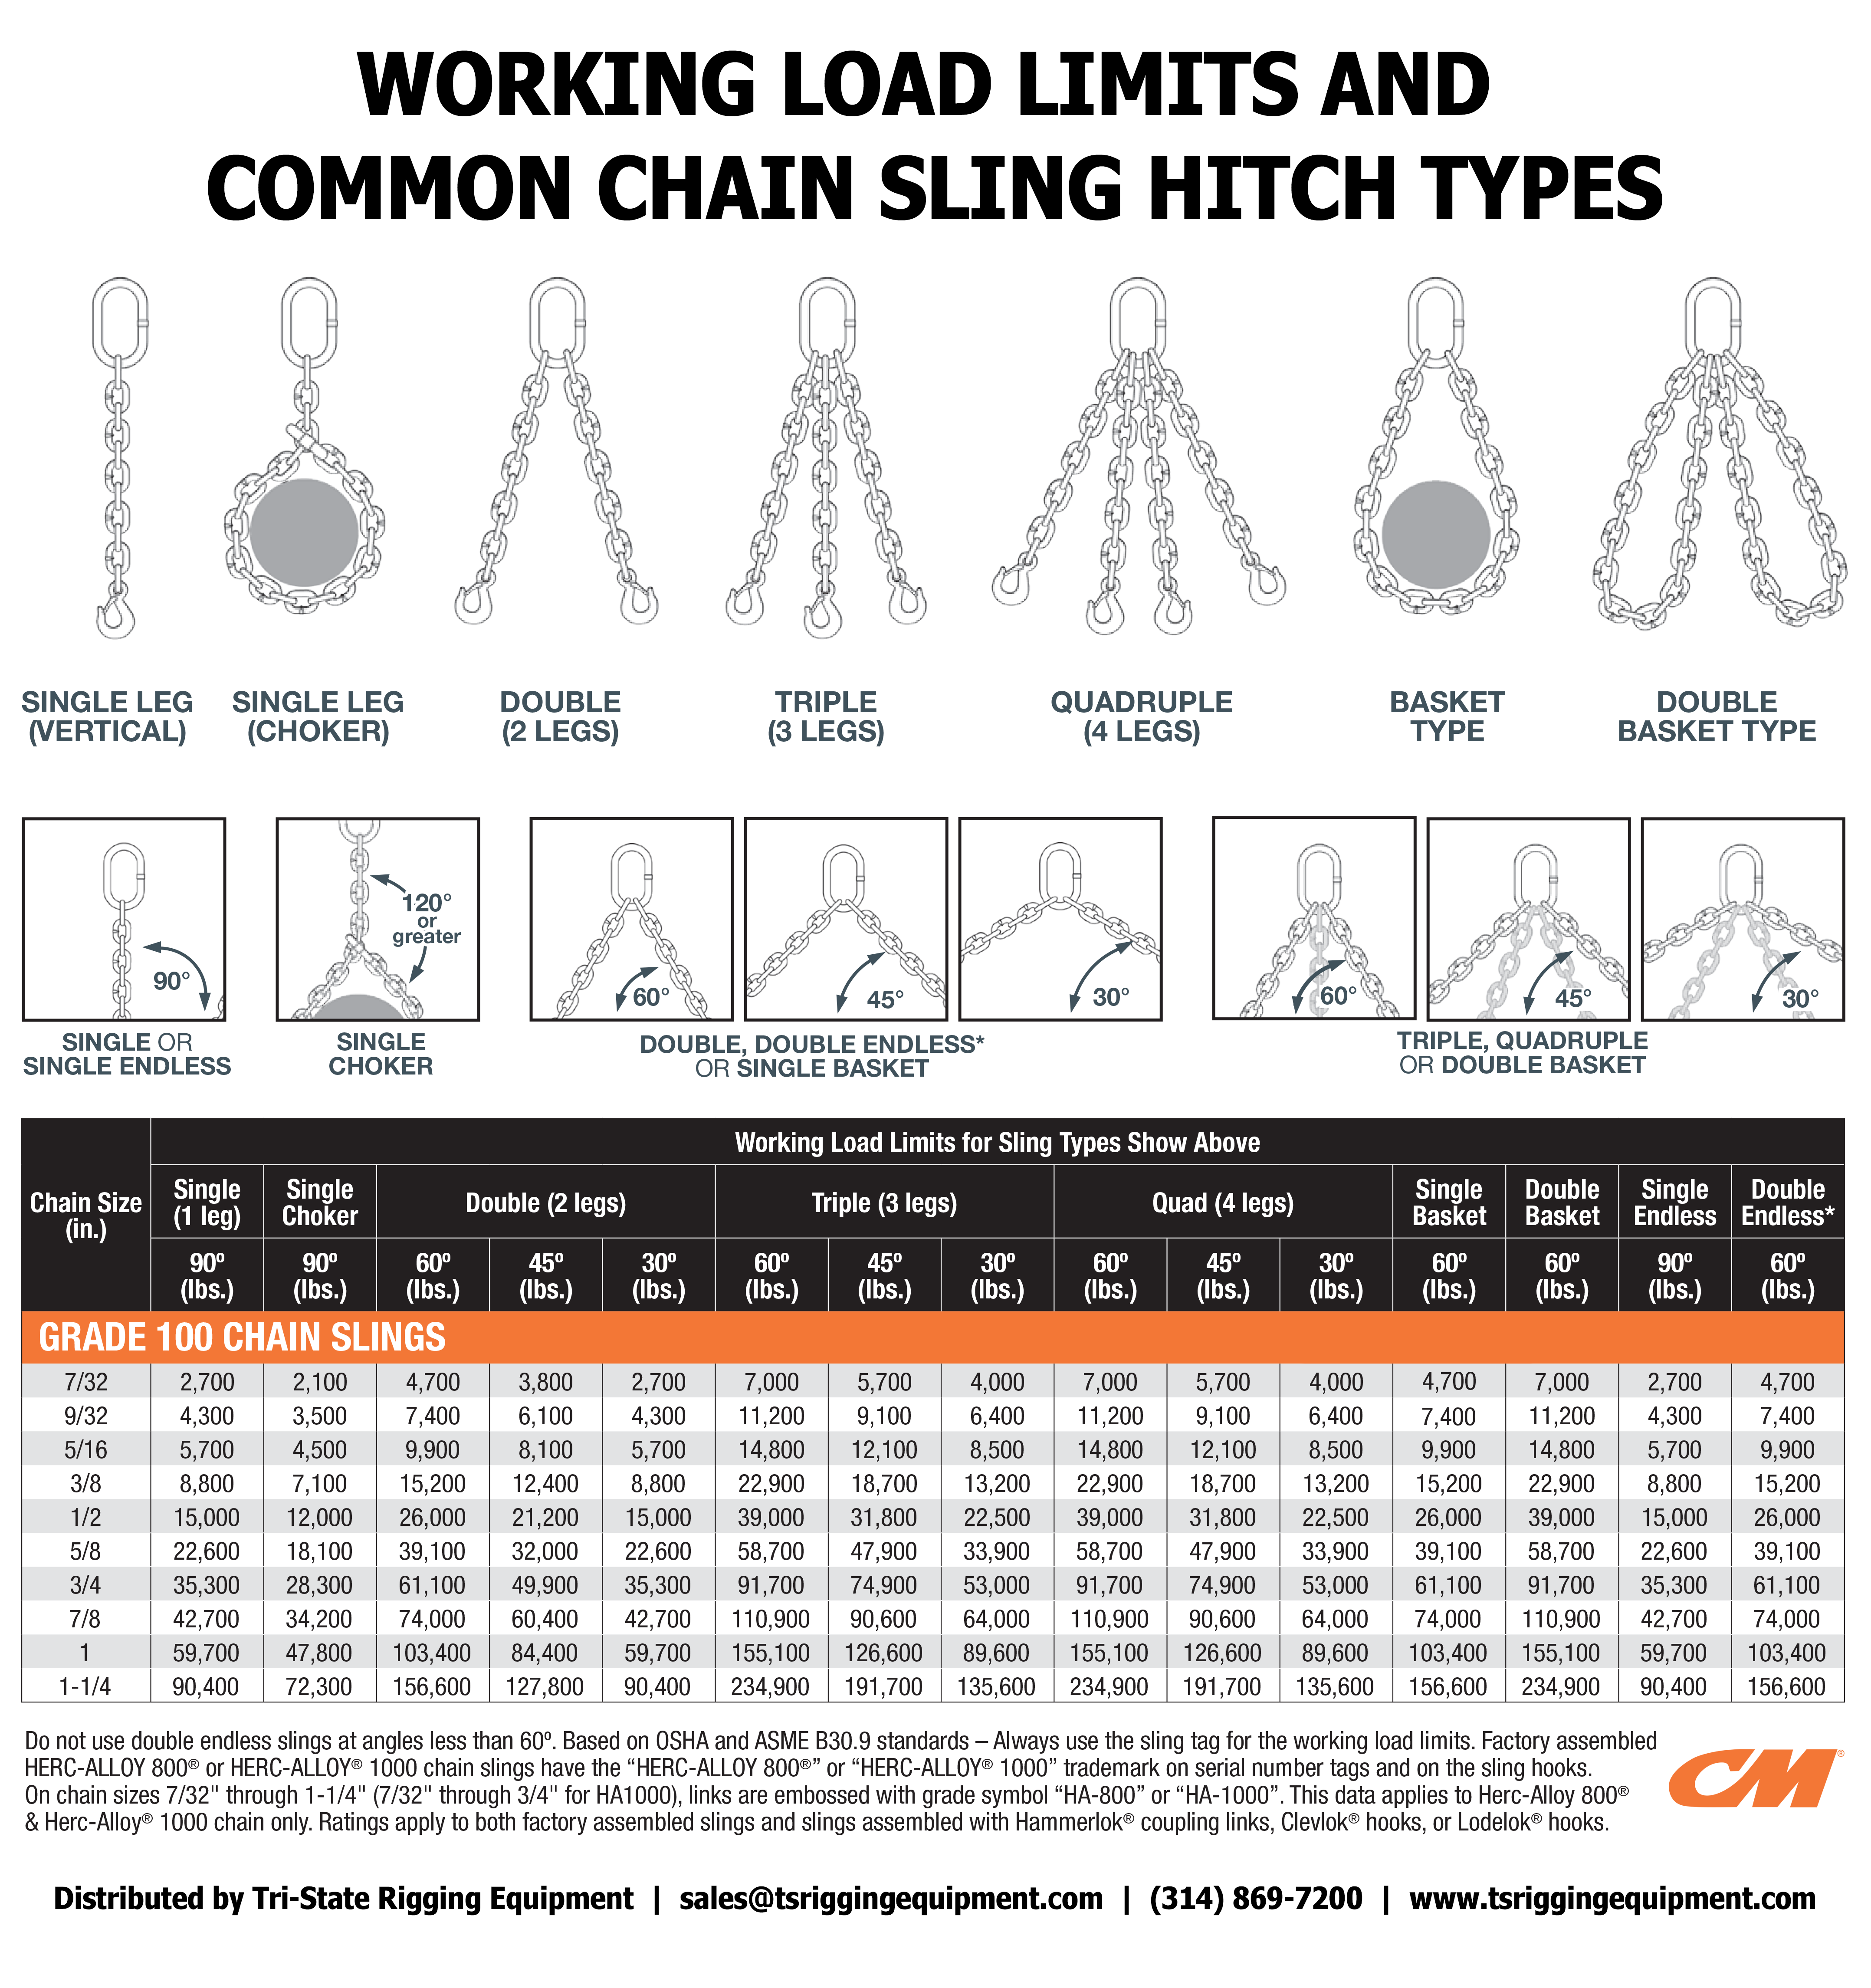 Grade 100 8800 lbs Vertical Load Capacity 6 Length Fixed-Leg Mazzella SOG Welded Alloy Chain Sling 3/8 Chain Size